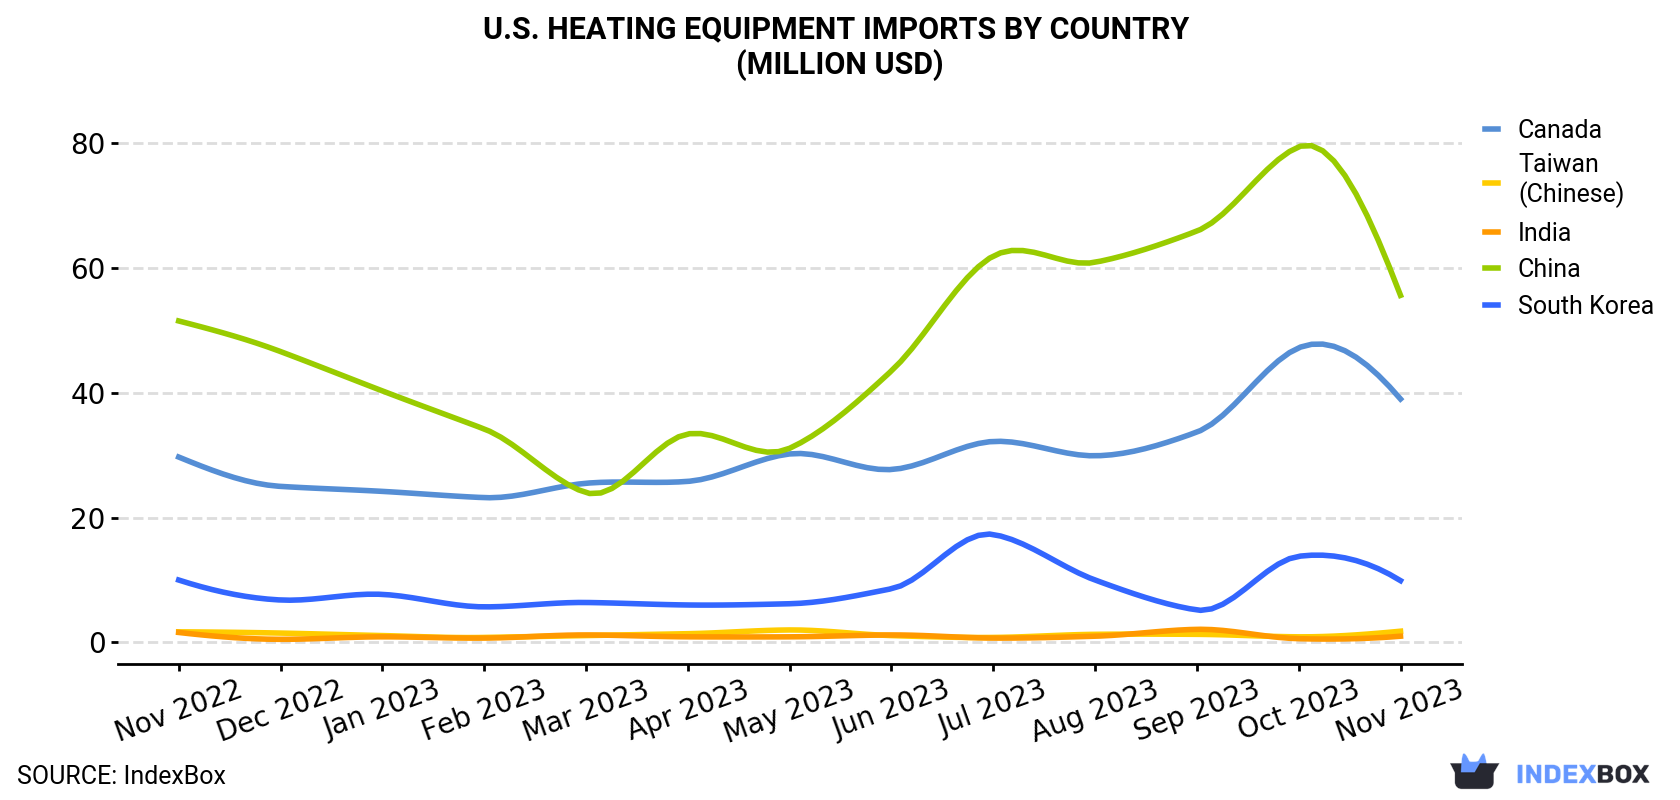 U.S. Heating Equipment Imports By Country (Million USD)